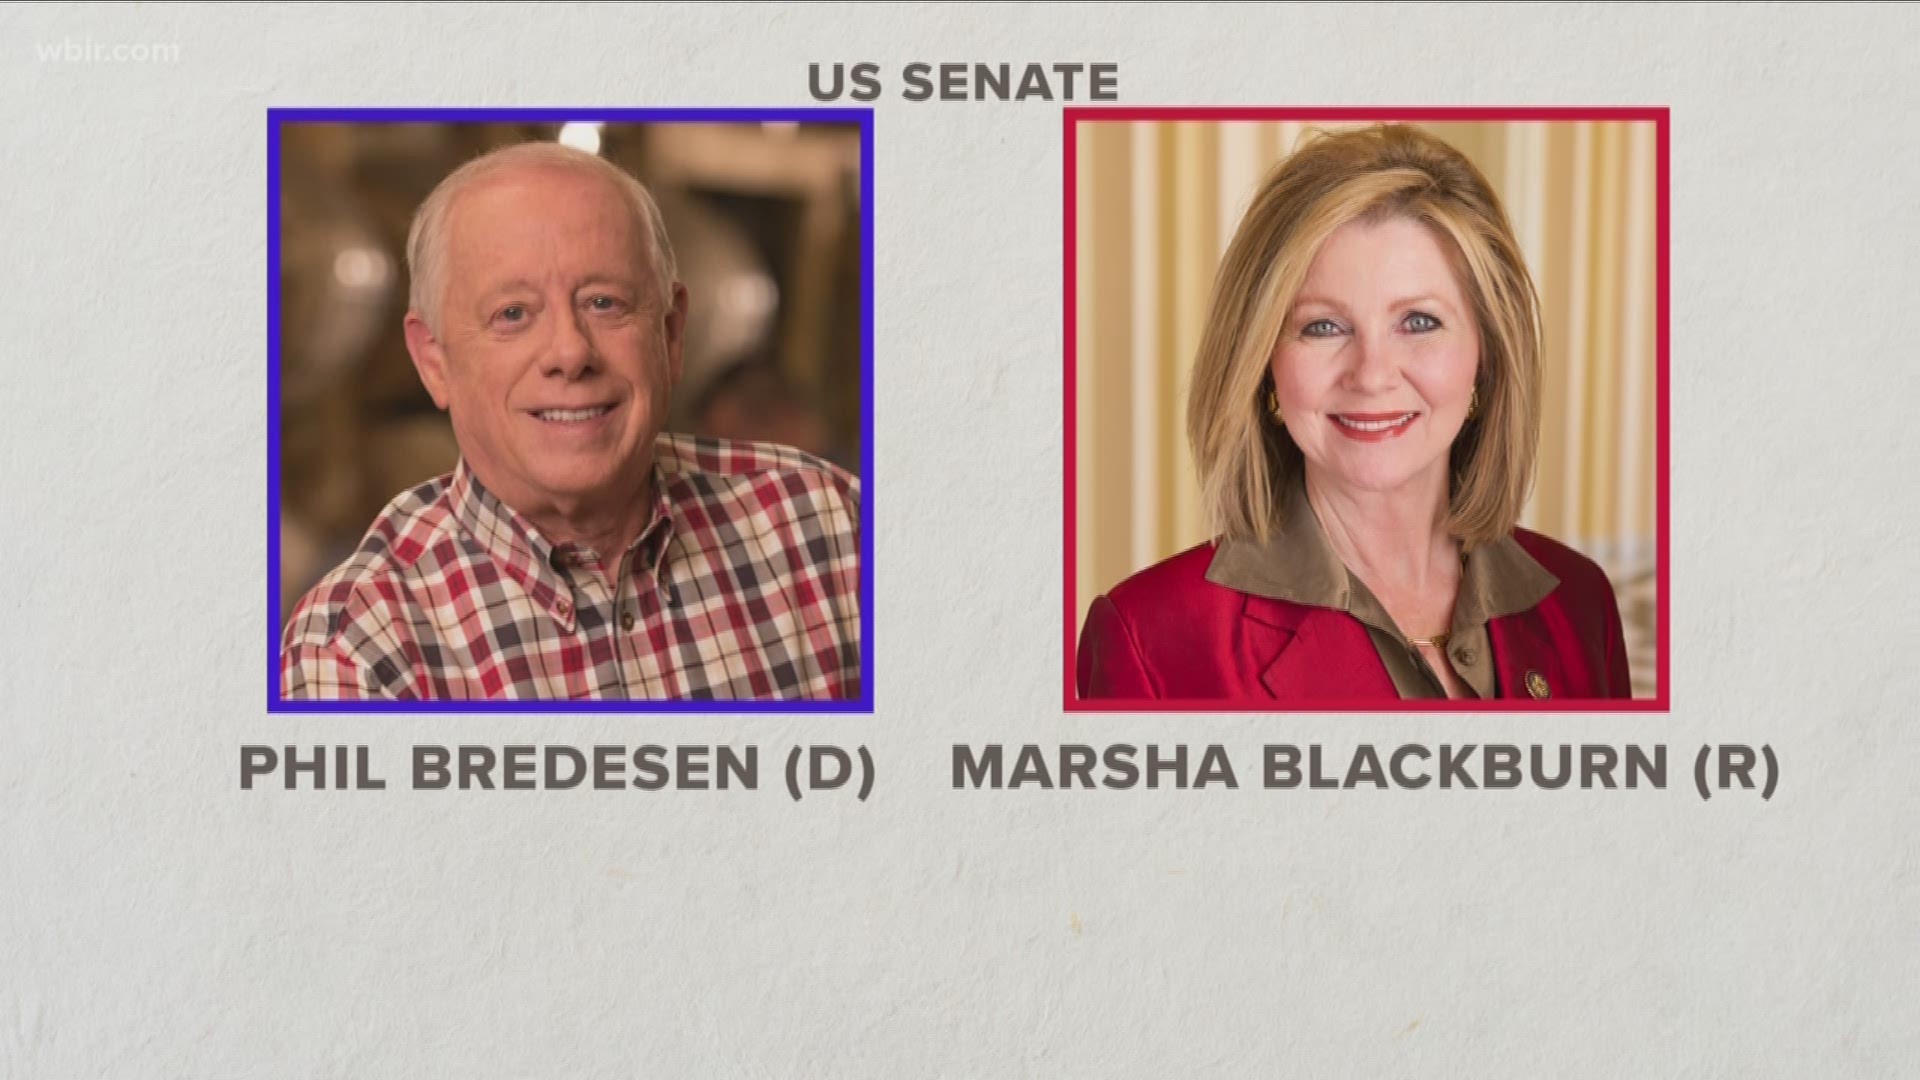 The race between Marsha Blackbun and Phil Bredesen wasn't as close as many analysts expected.